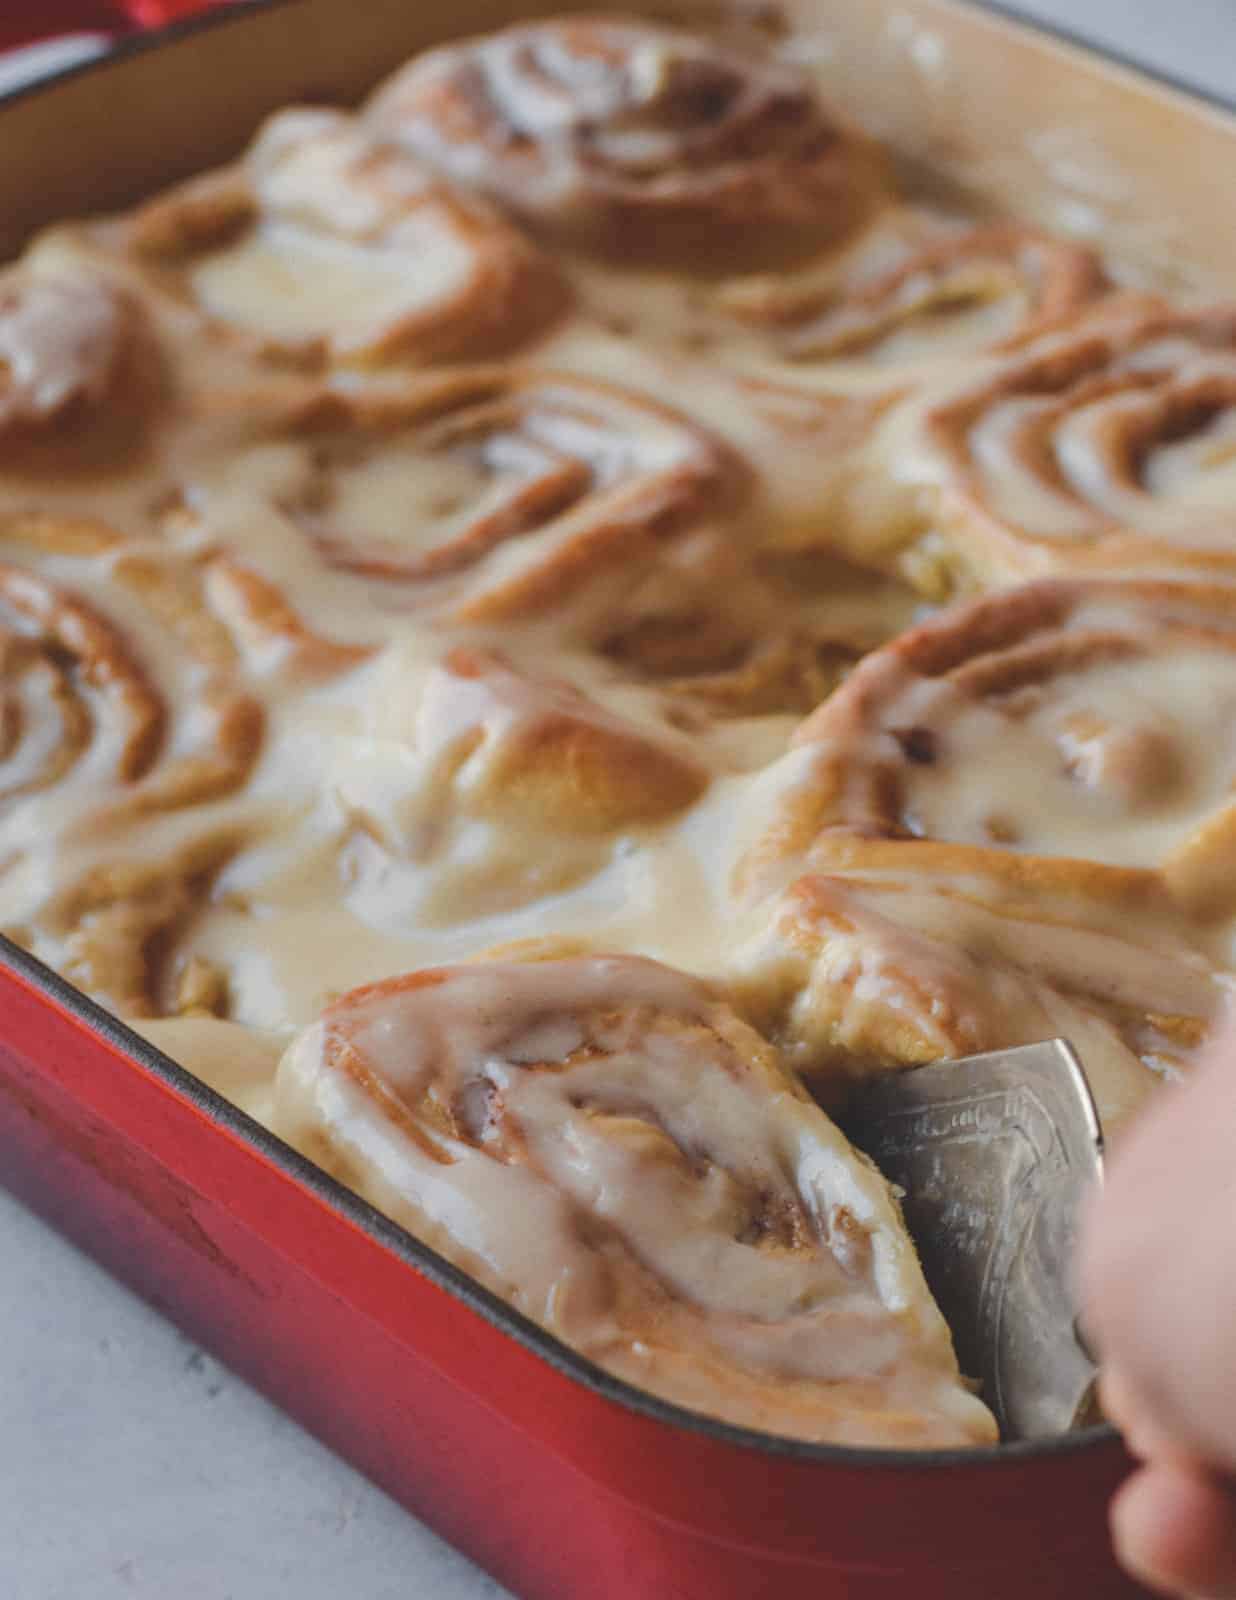 Casserole dish of sticky cinnamon rolls being cut into pieces